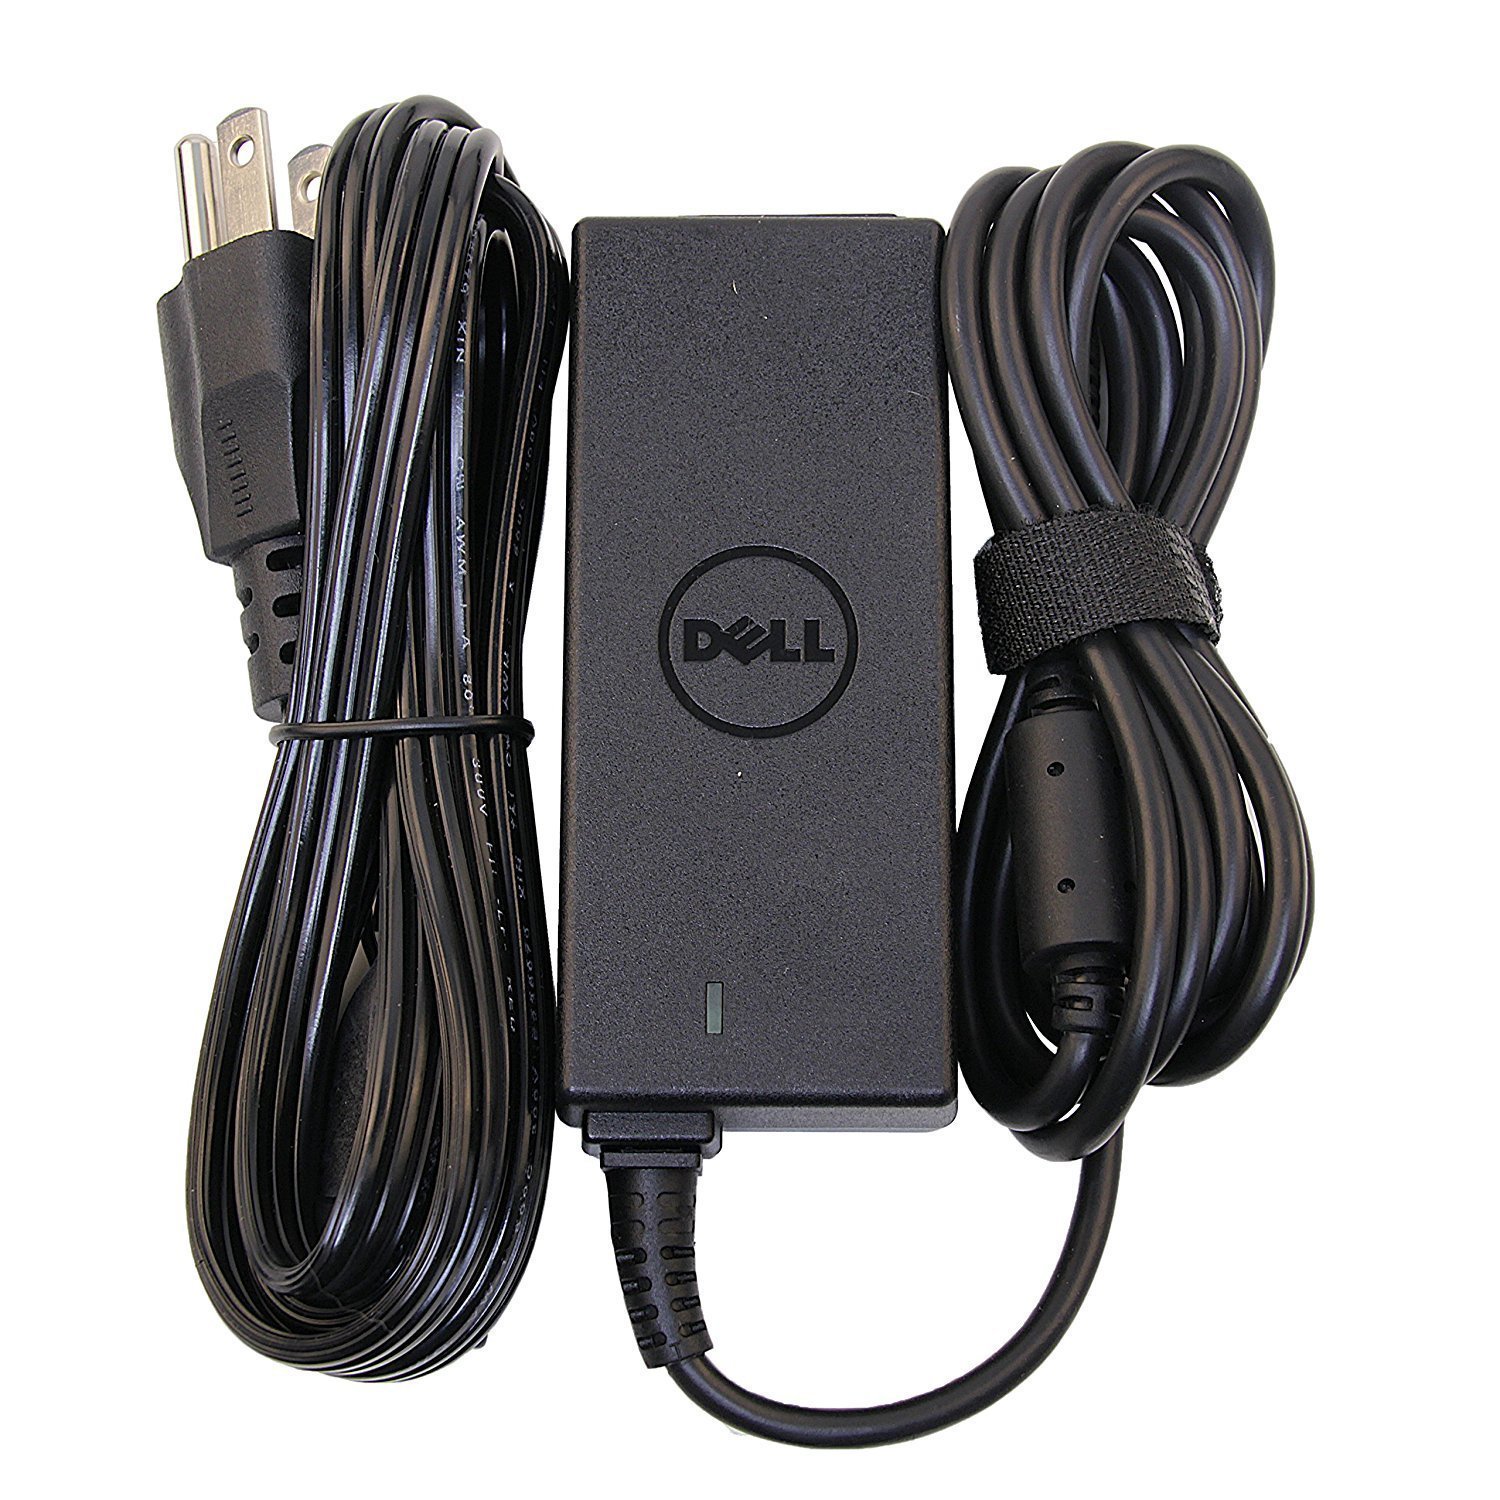 DELL INSPIRON 45W LAPTOP CHARGER ADAPTER POWER CORD FOR INSPIRON 13 5368 5378 7352 7353 7359 7368 7378  Inspiron 14 3451 3452 3458 3459 5451 5452 5455 5458 5459 5468 7437 7460; XPS 11 12 1